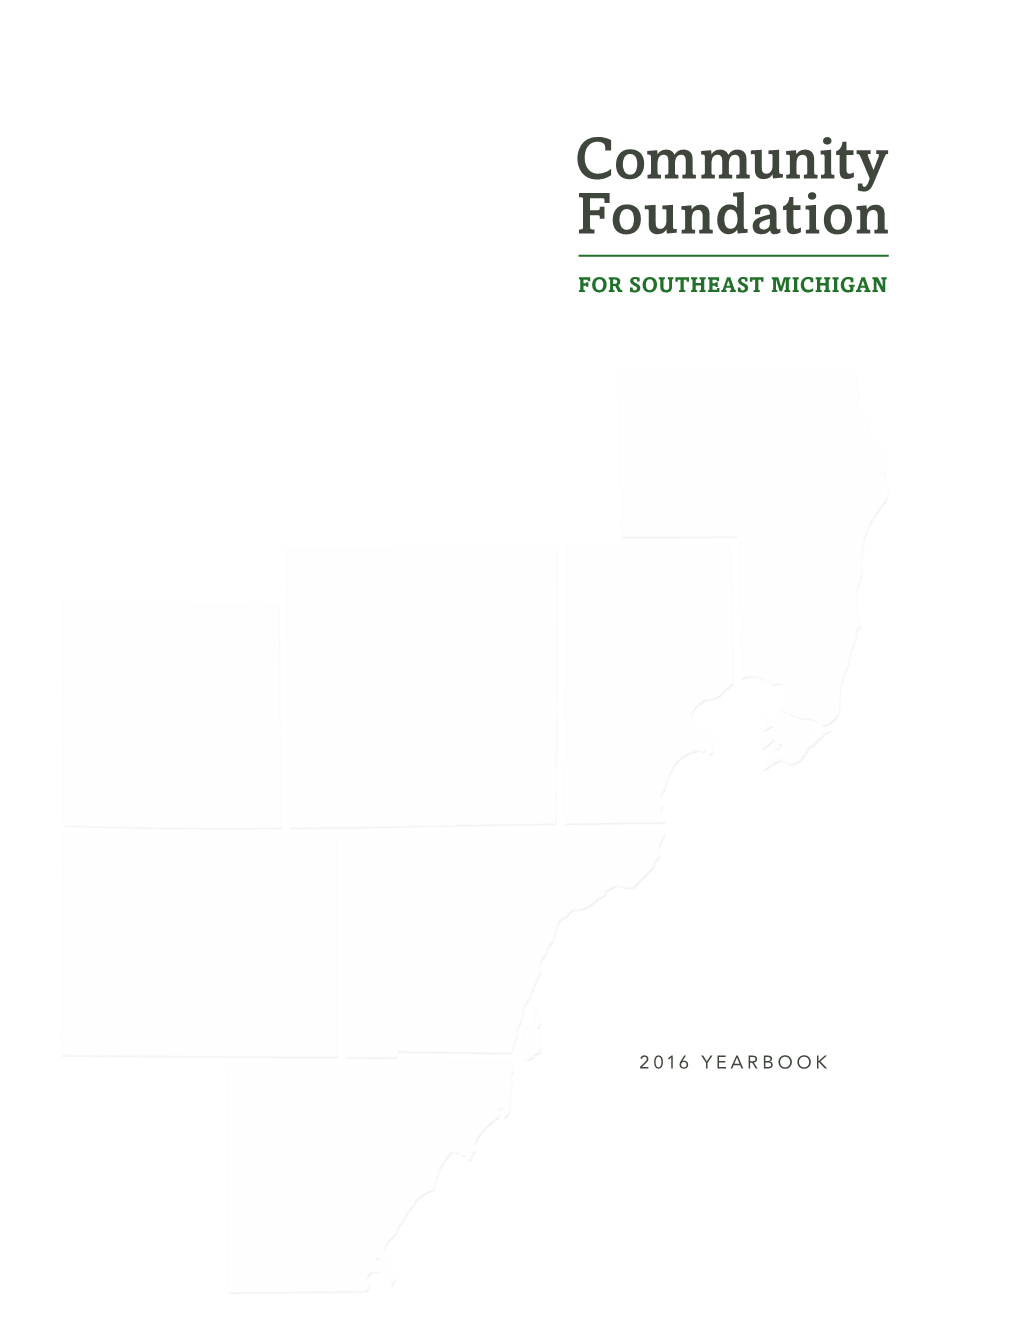 2016 Yearbook About the Foundation